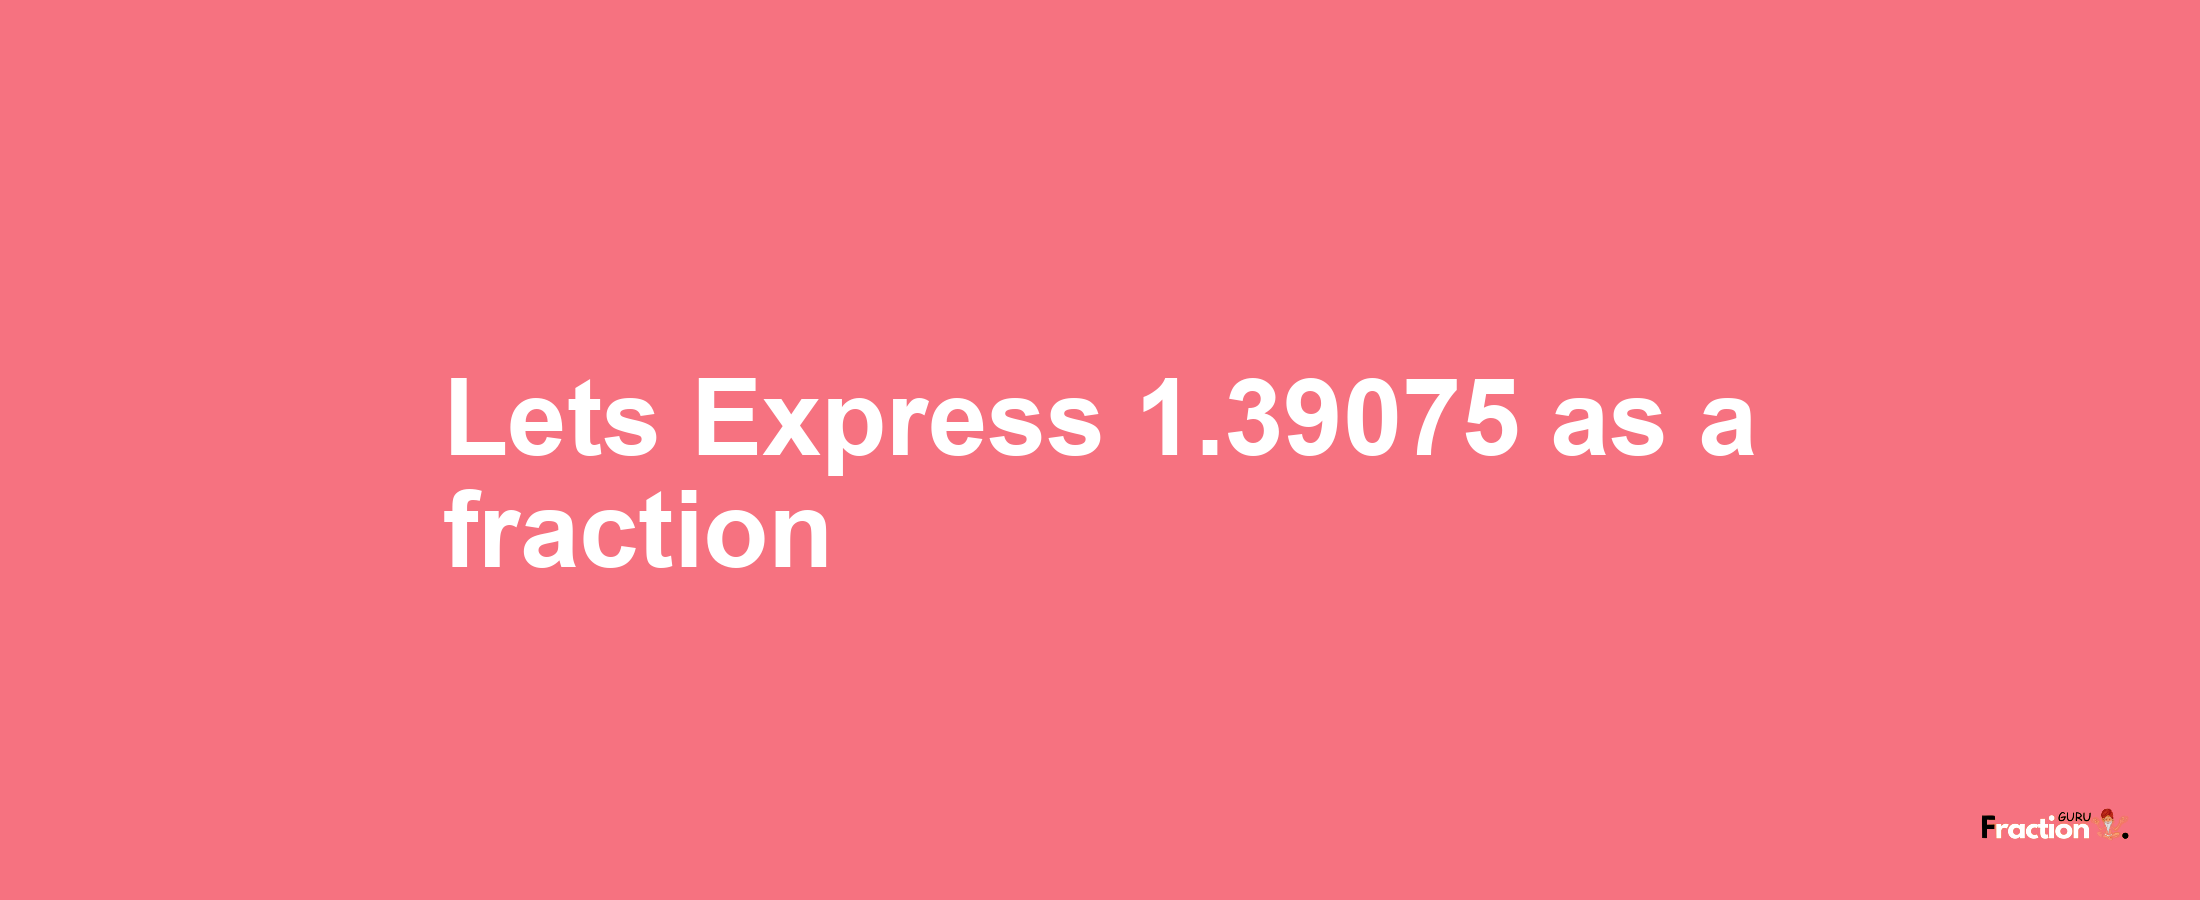 Lets Express 1.39075 as afraction